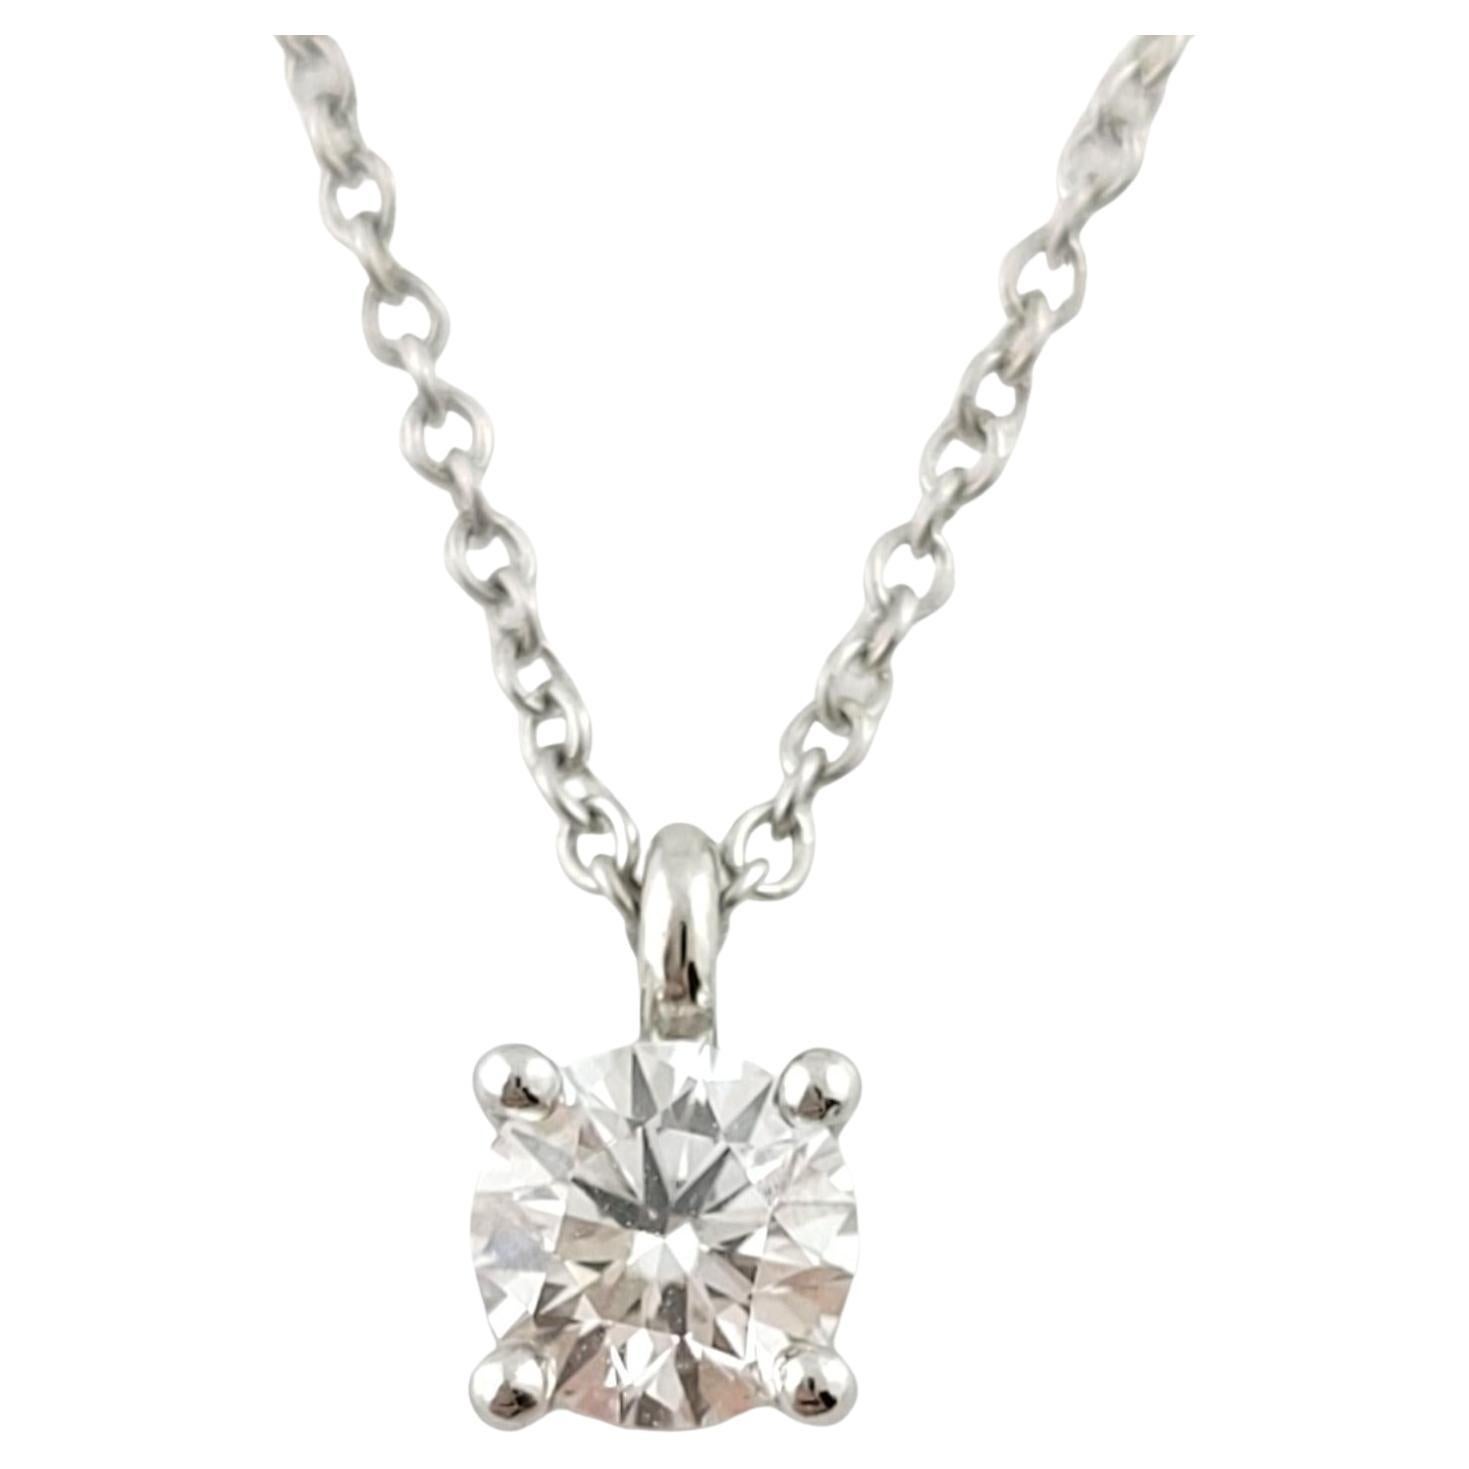 Tiffany and Co. Platinum Diamond Solitaire Pendant Necklace #15833 For ...